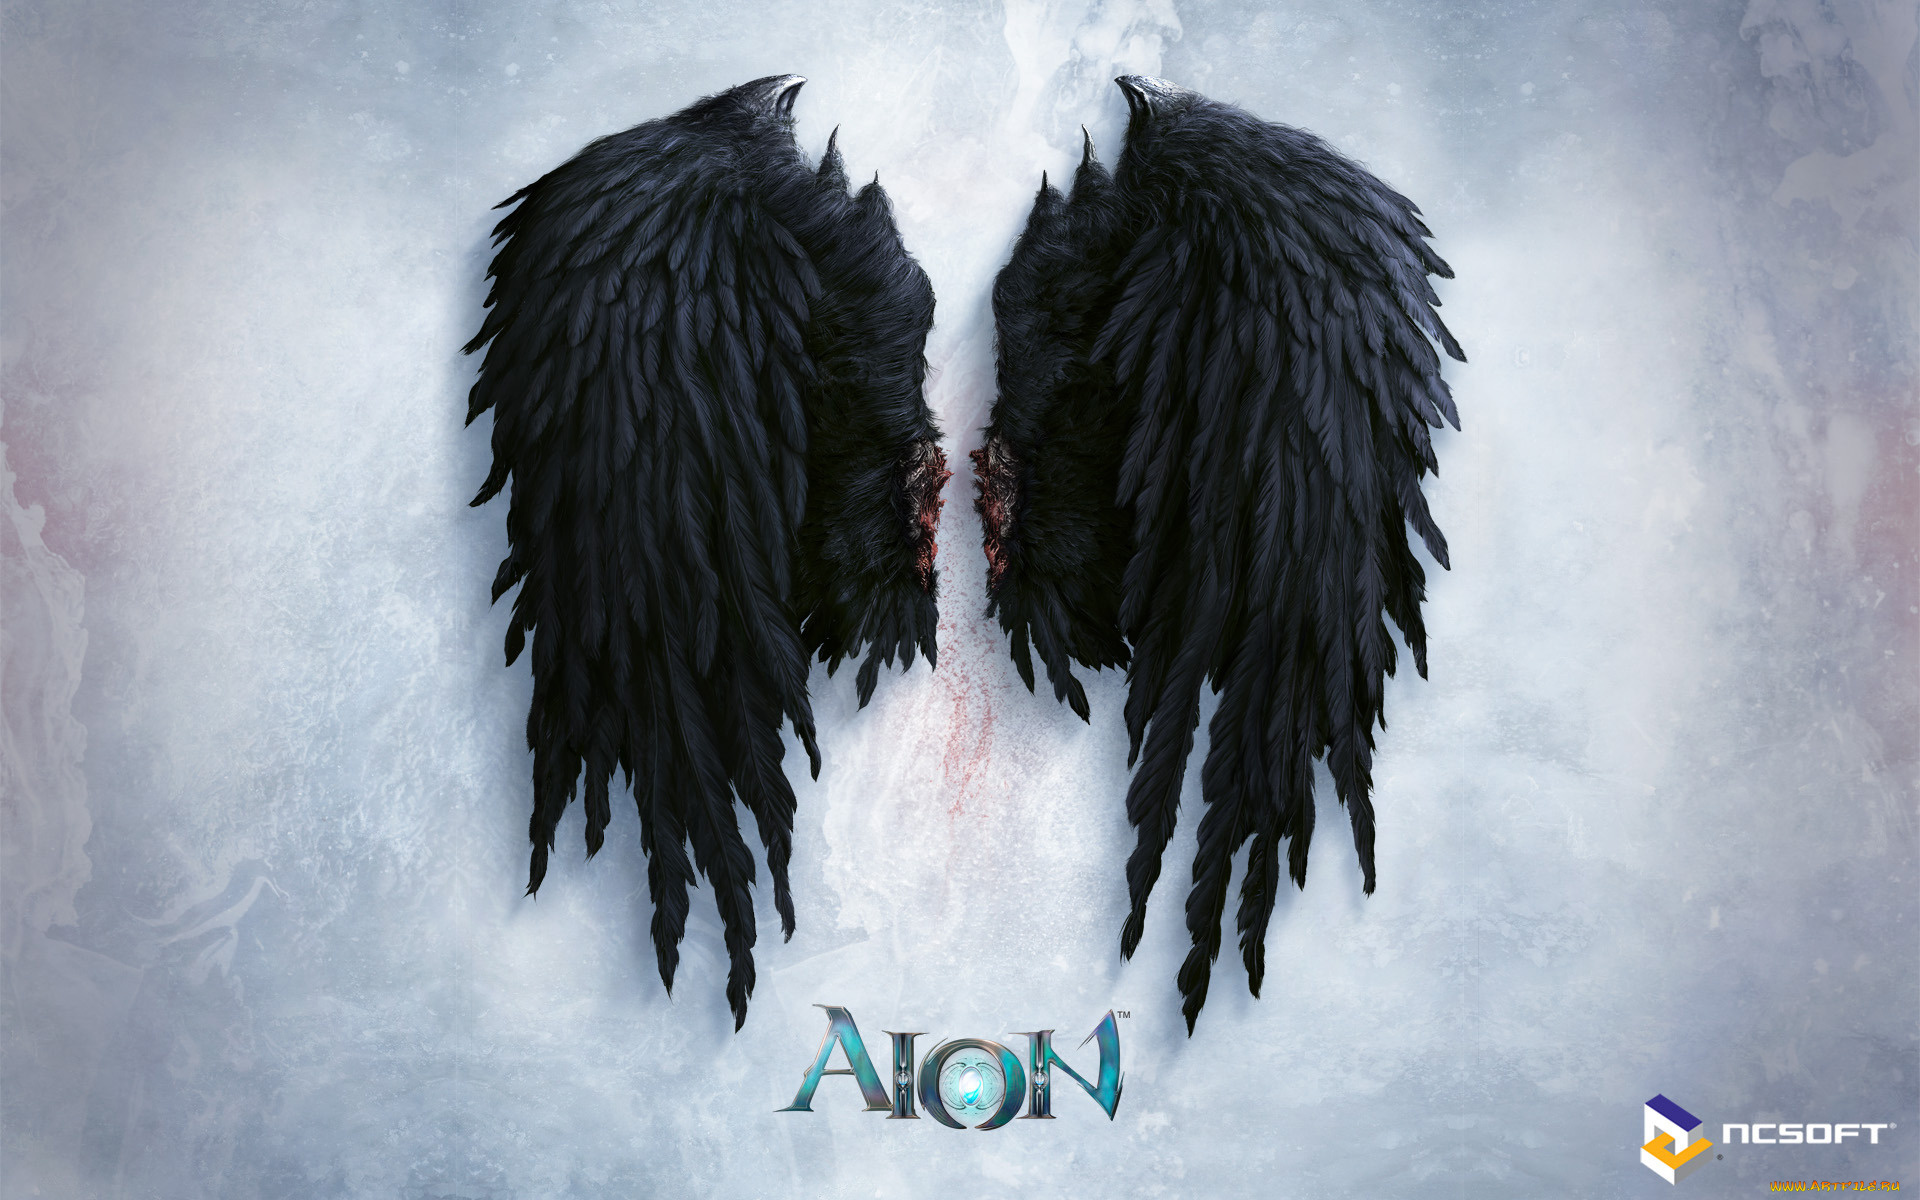 aion, the, tower, of, eternity, видео, игры